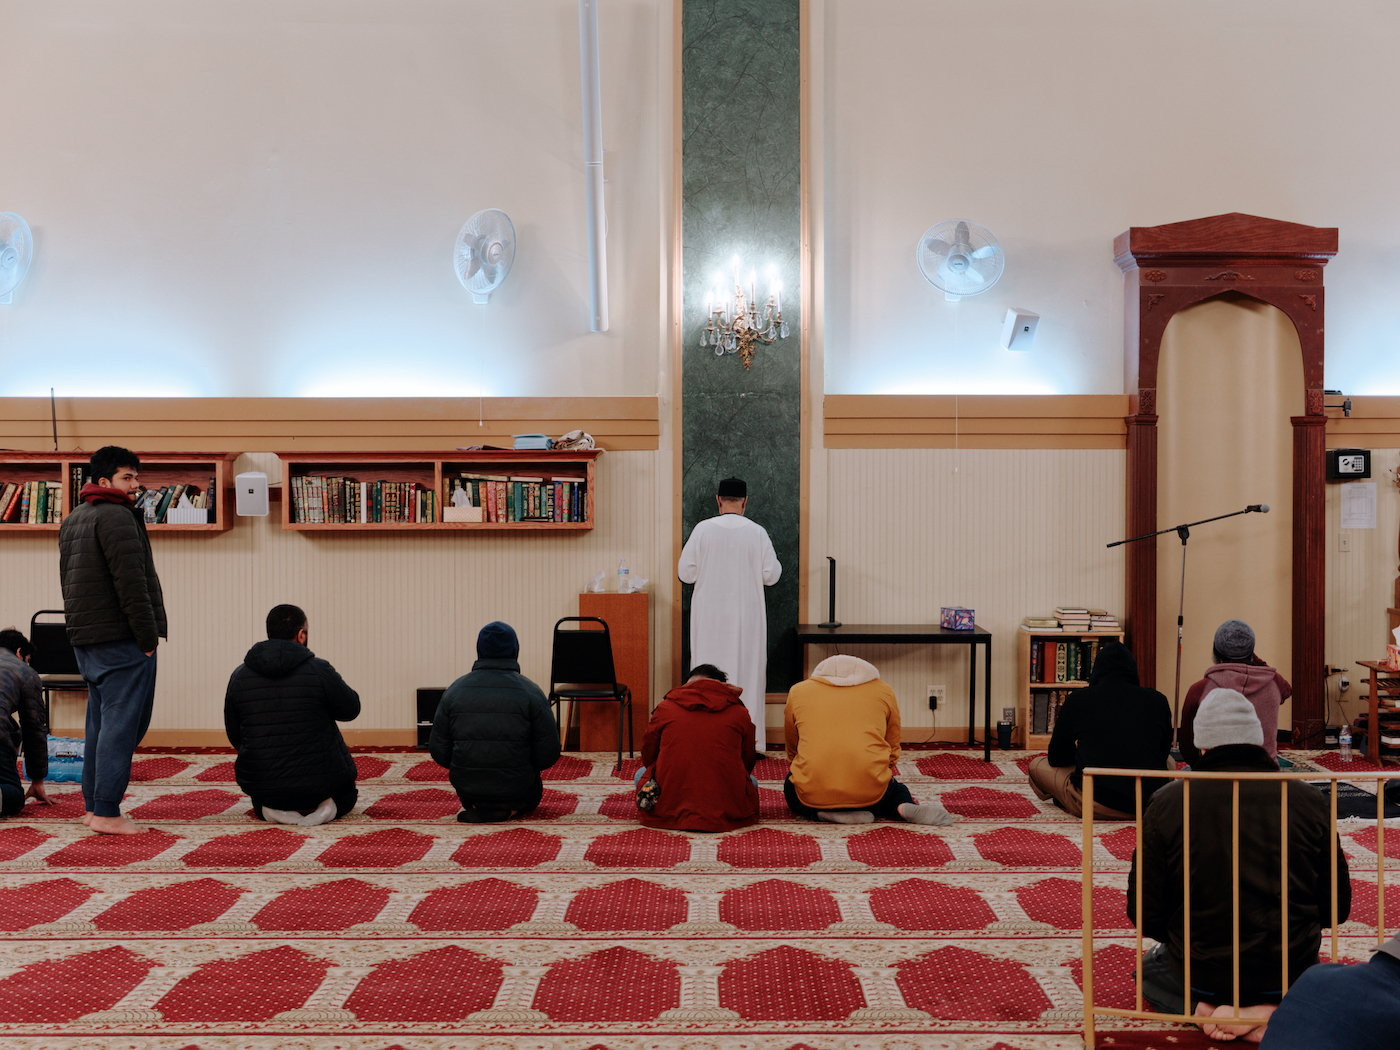 Men stand and sit facing forward in a prayer hall